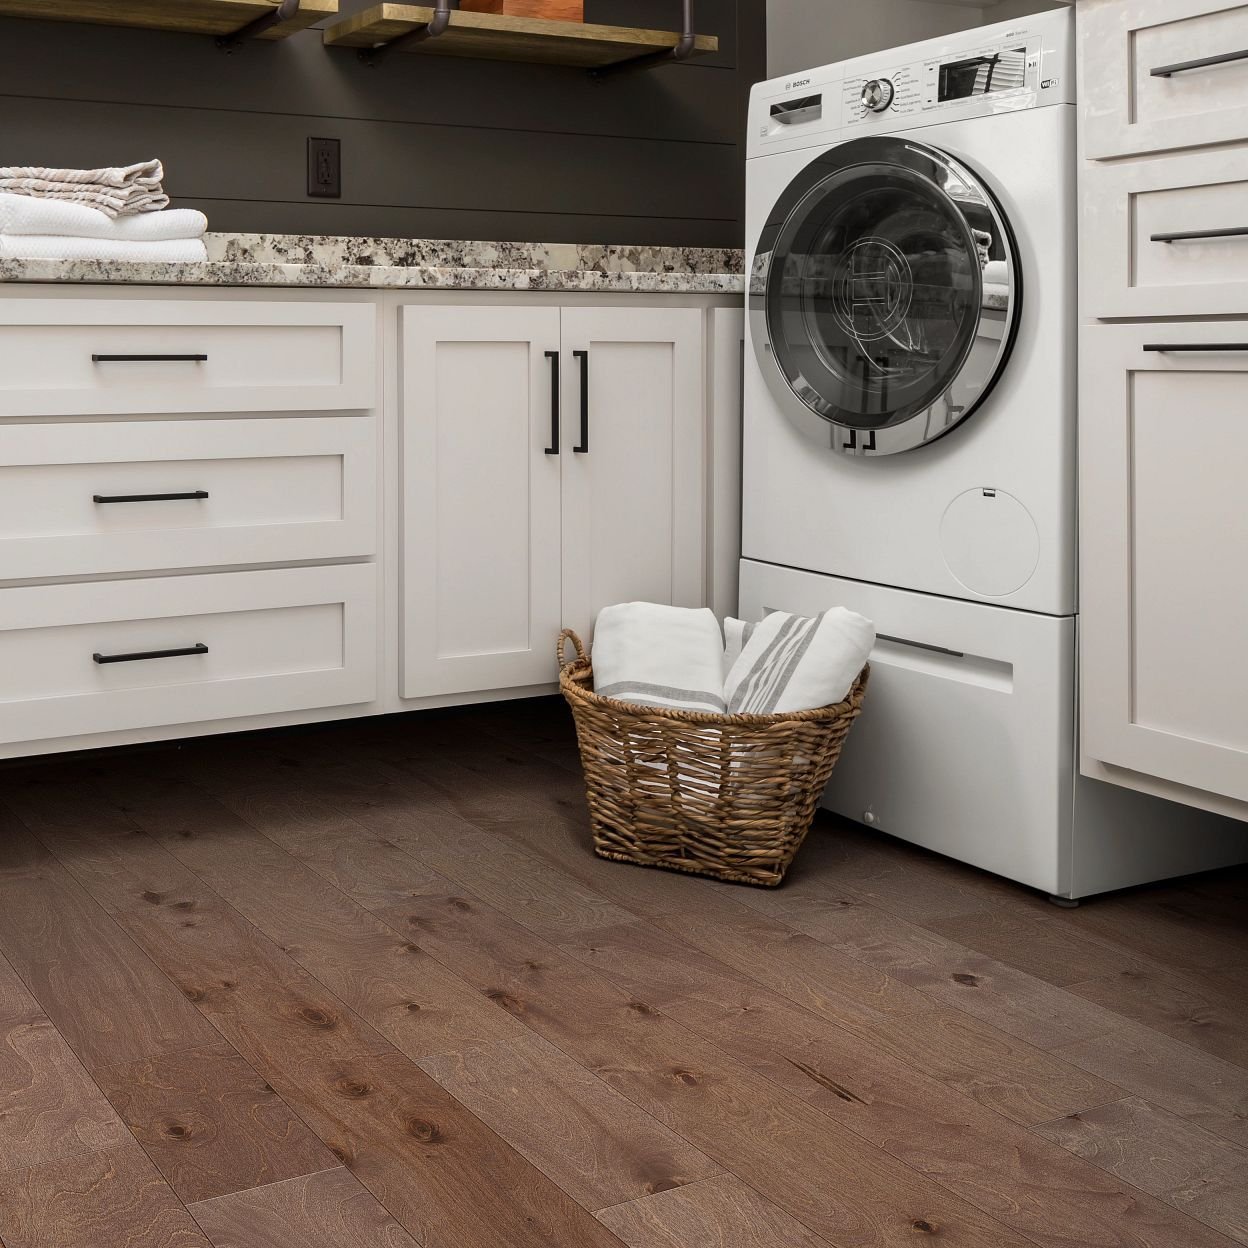 Laundry room with engineered hardwood flooring from Wholesale Flooring and Blinds in Casper, WY